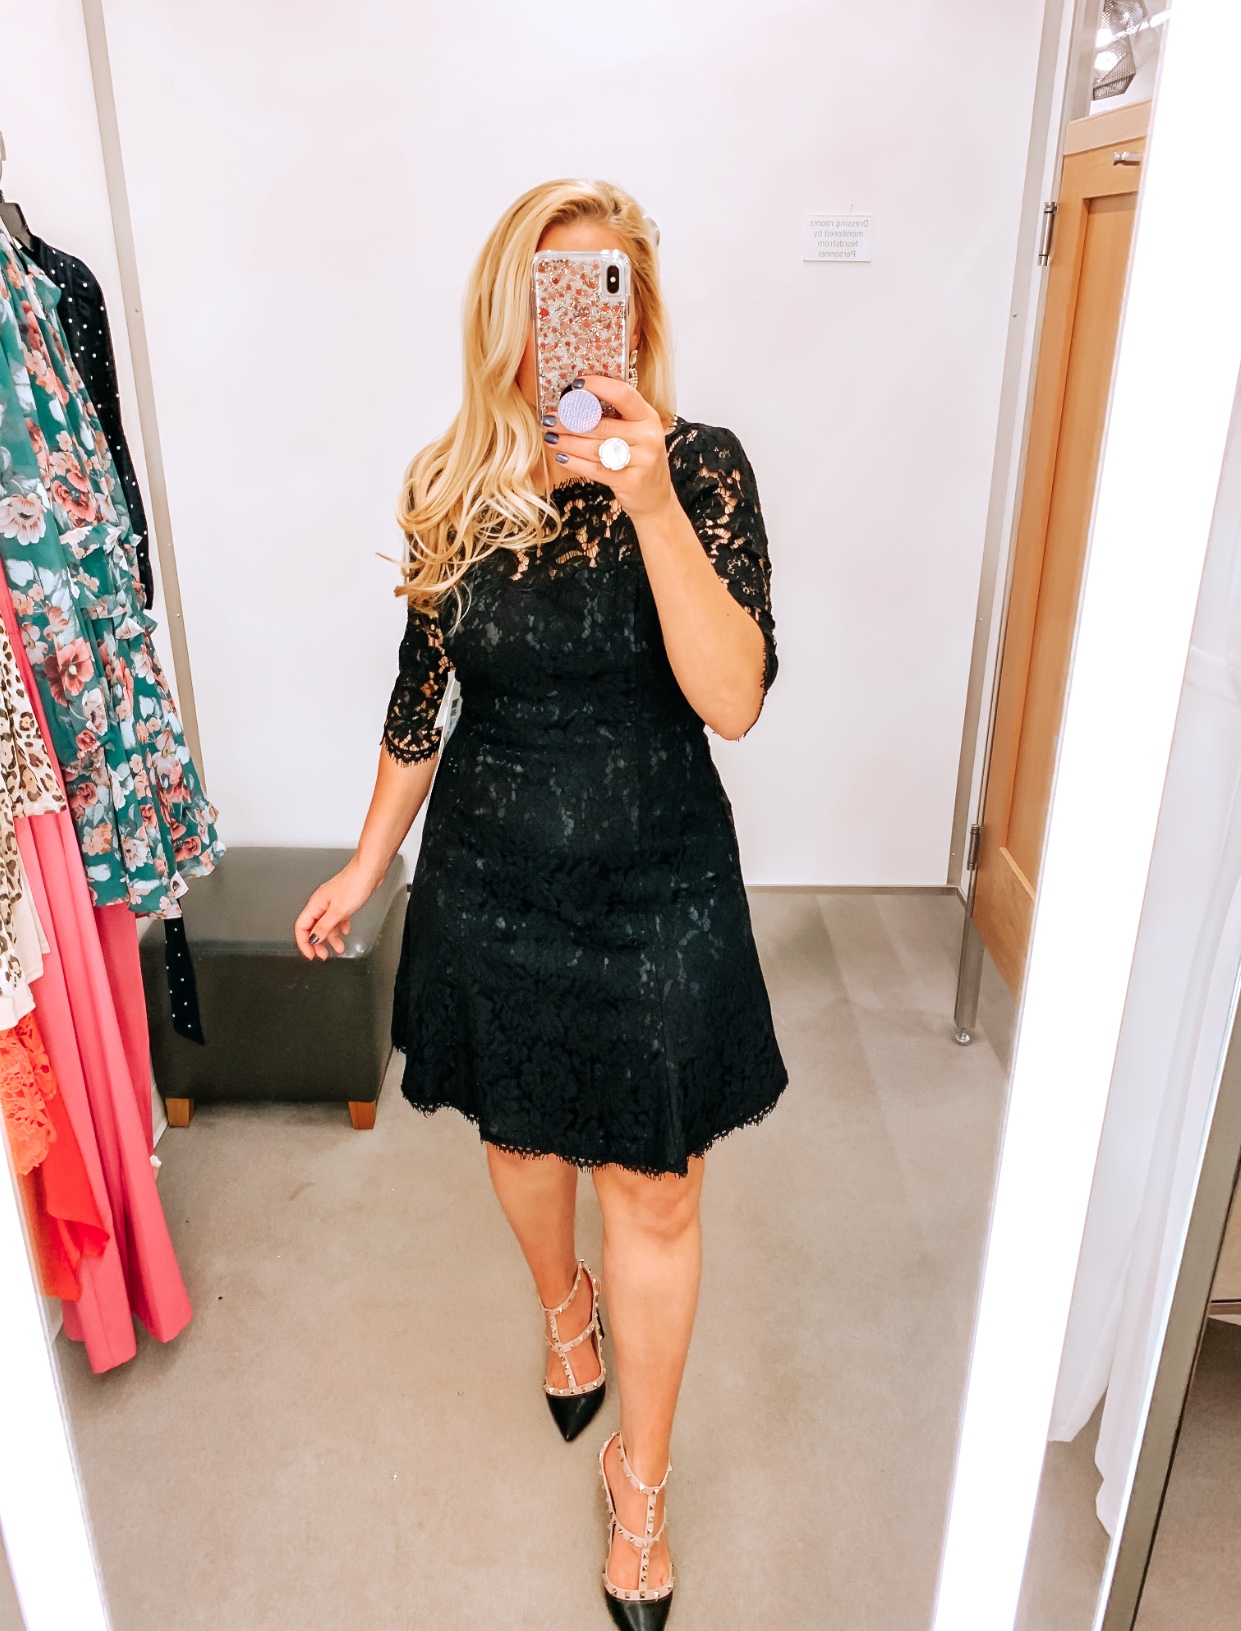 Tampa Blogger Jenn Truman providing a mirror selfie inside Nordstrom at Tampa International Plaza. She is wearing an Eliza J black Lace Fit and flare cocktail dress from Nordstrom and Valentino dupe black studded heels from Amazon. She is holding her phone for a mirror selfie try on session.